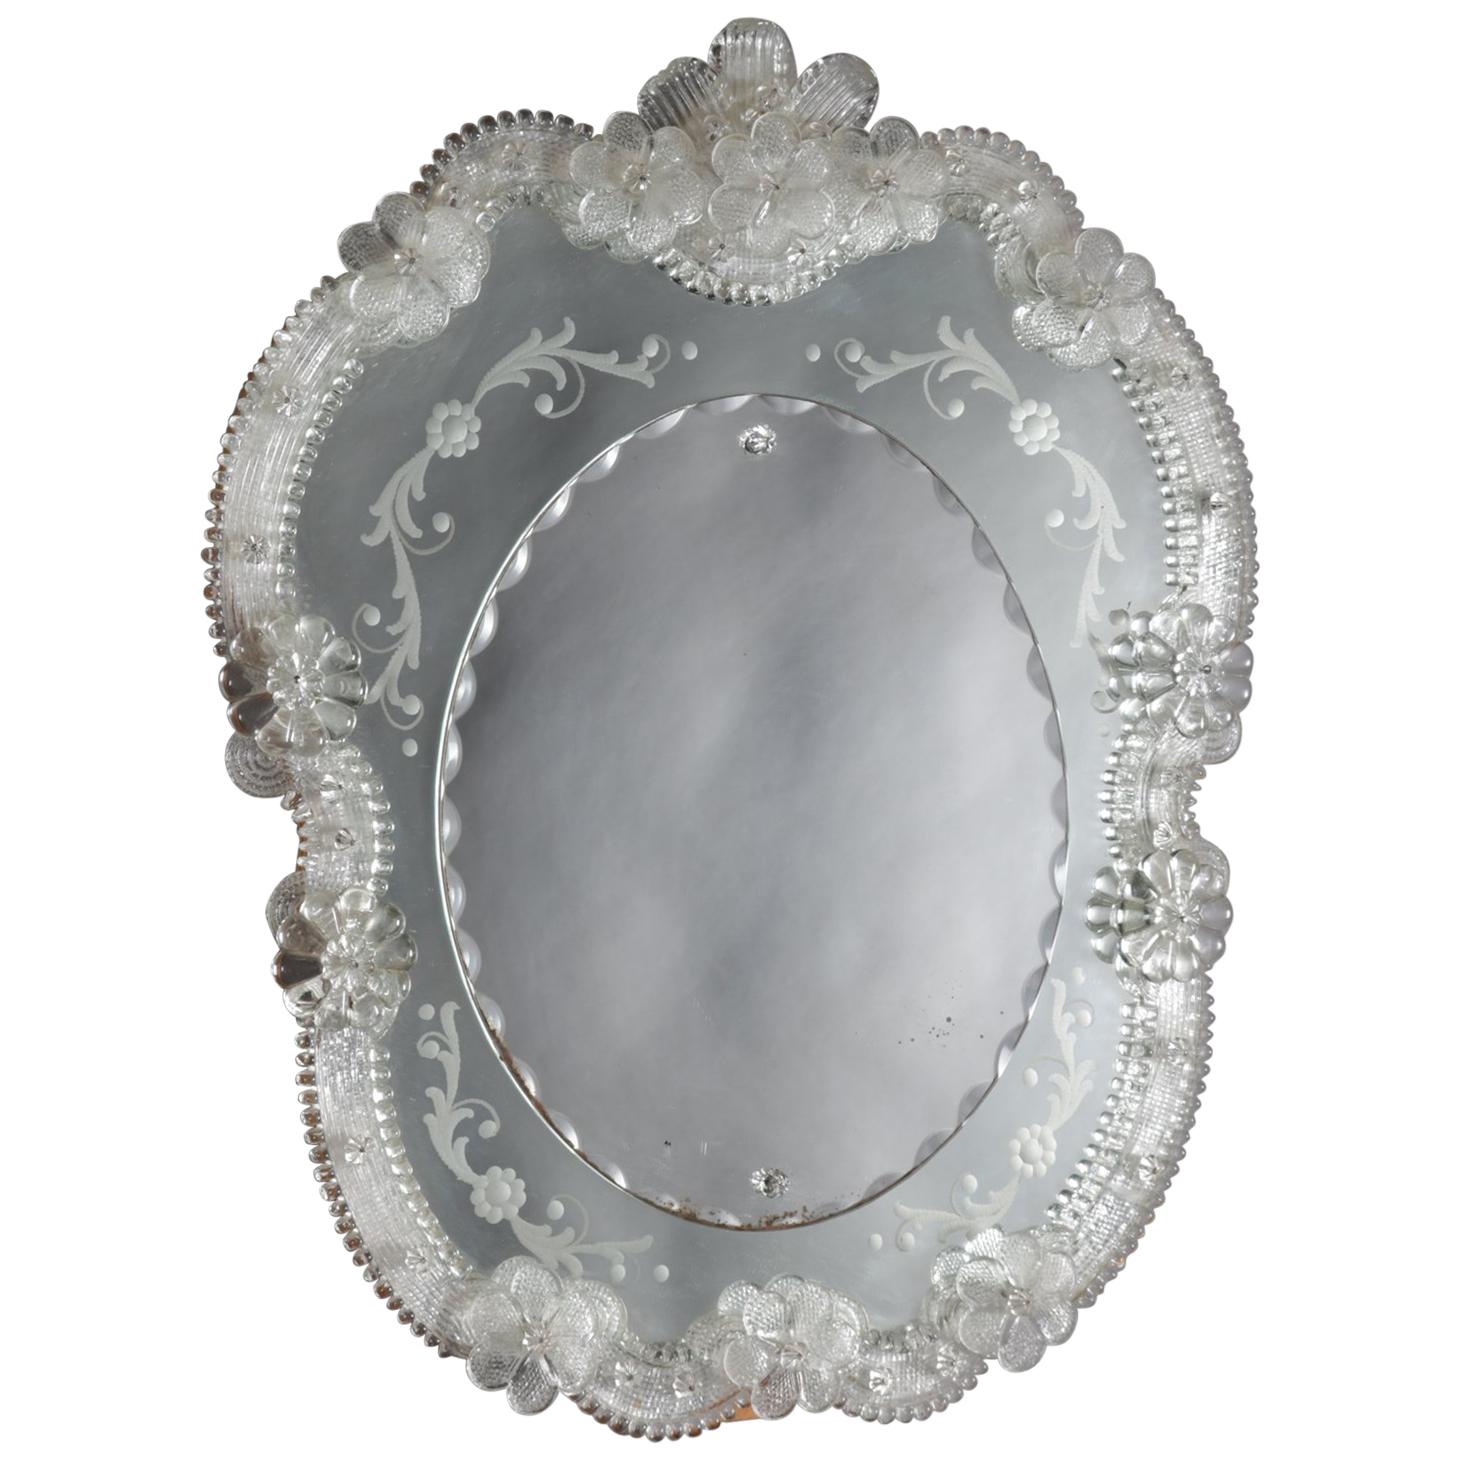 Italian Venetian Foliate Etched and Floral Vanity or Wall Mirror, 20th Century